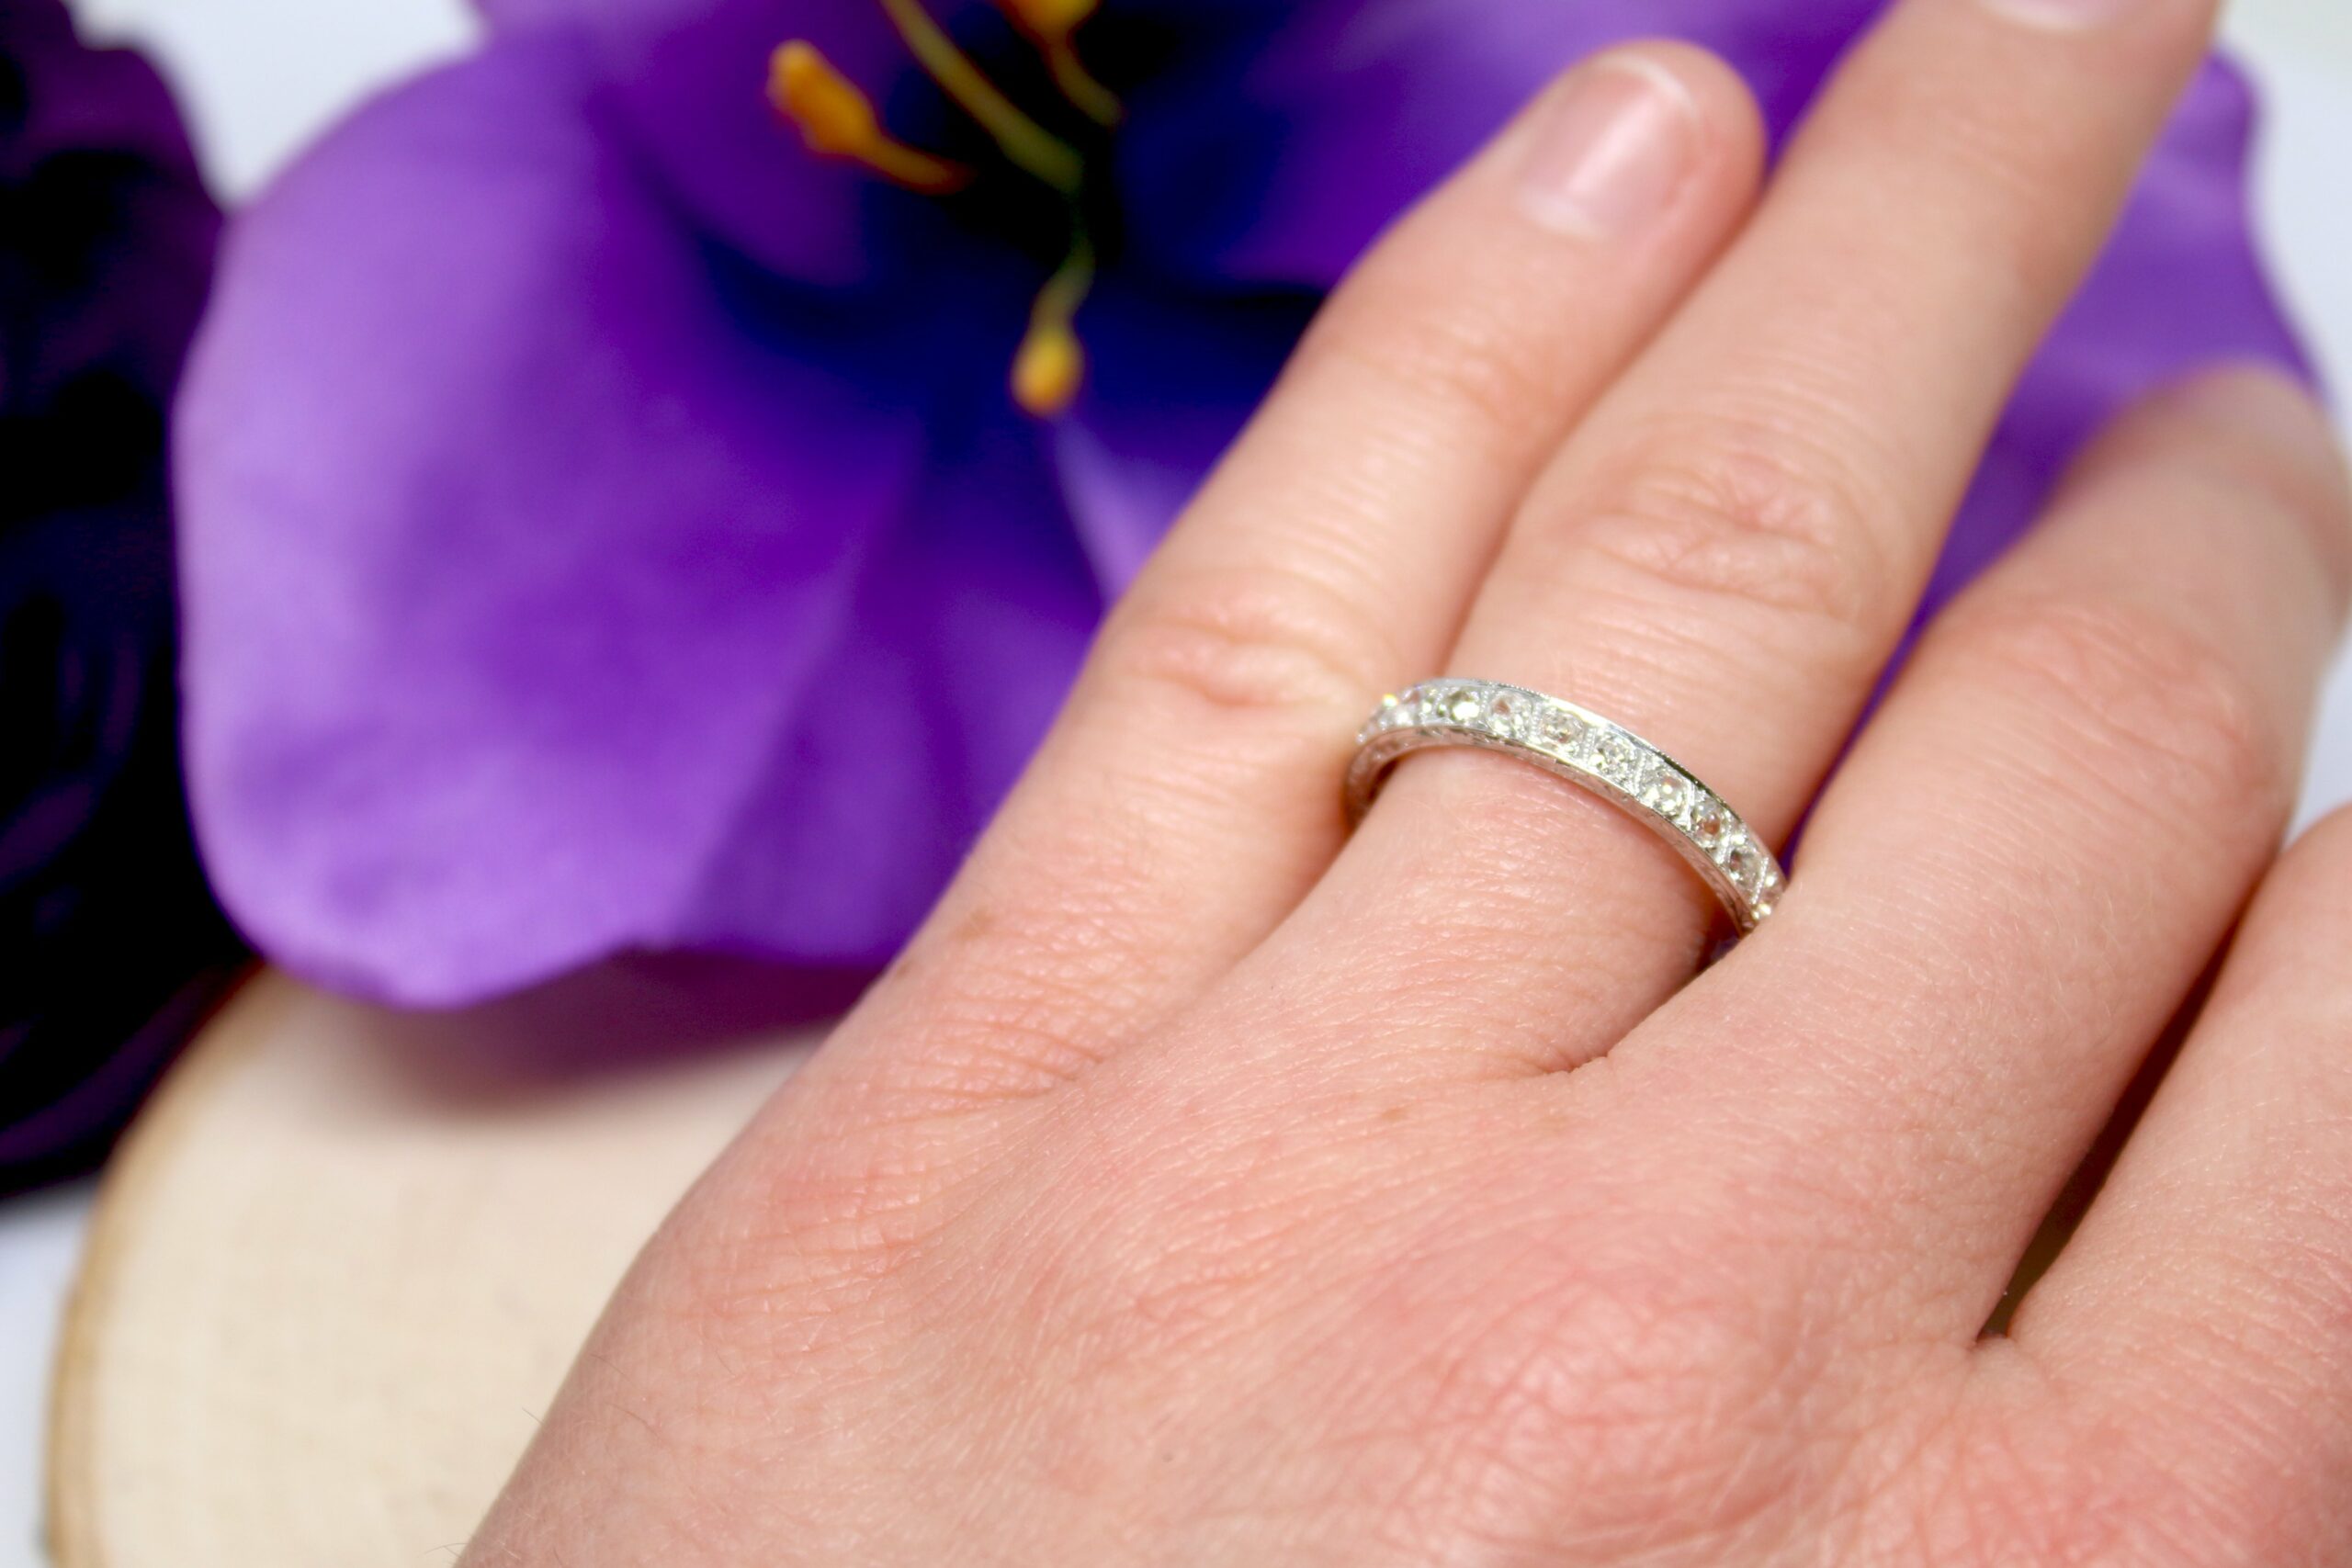 A small diamond banded ring.